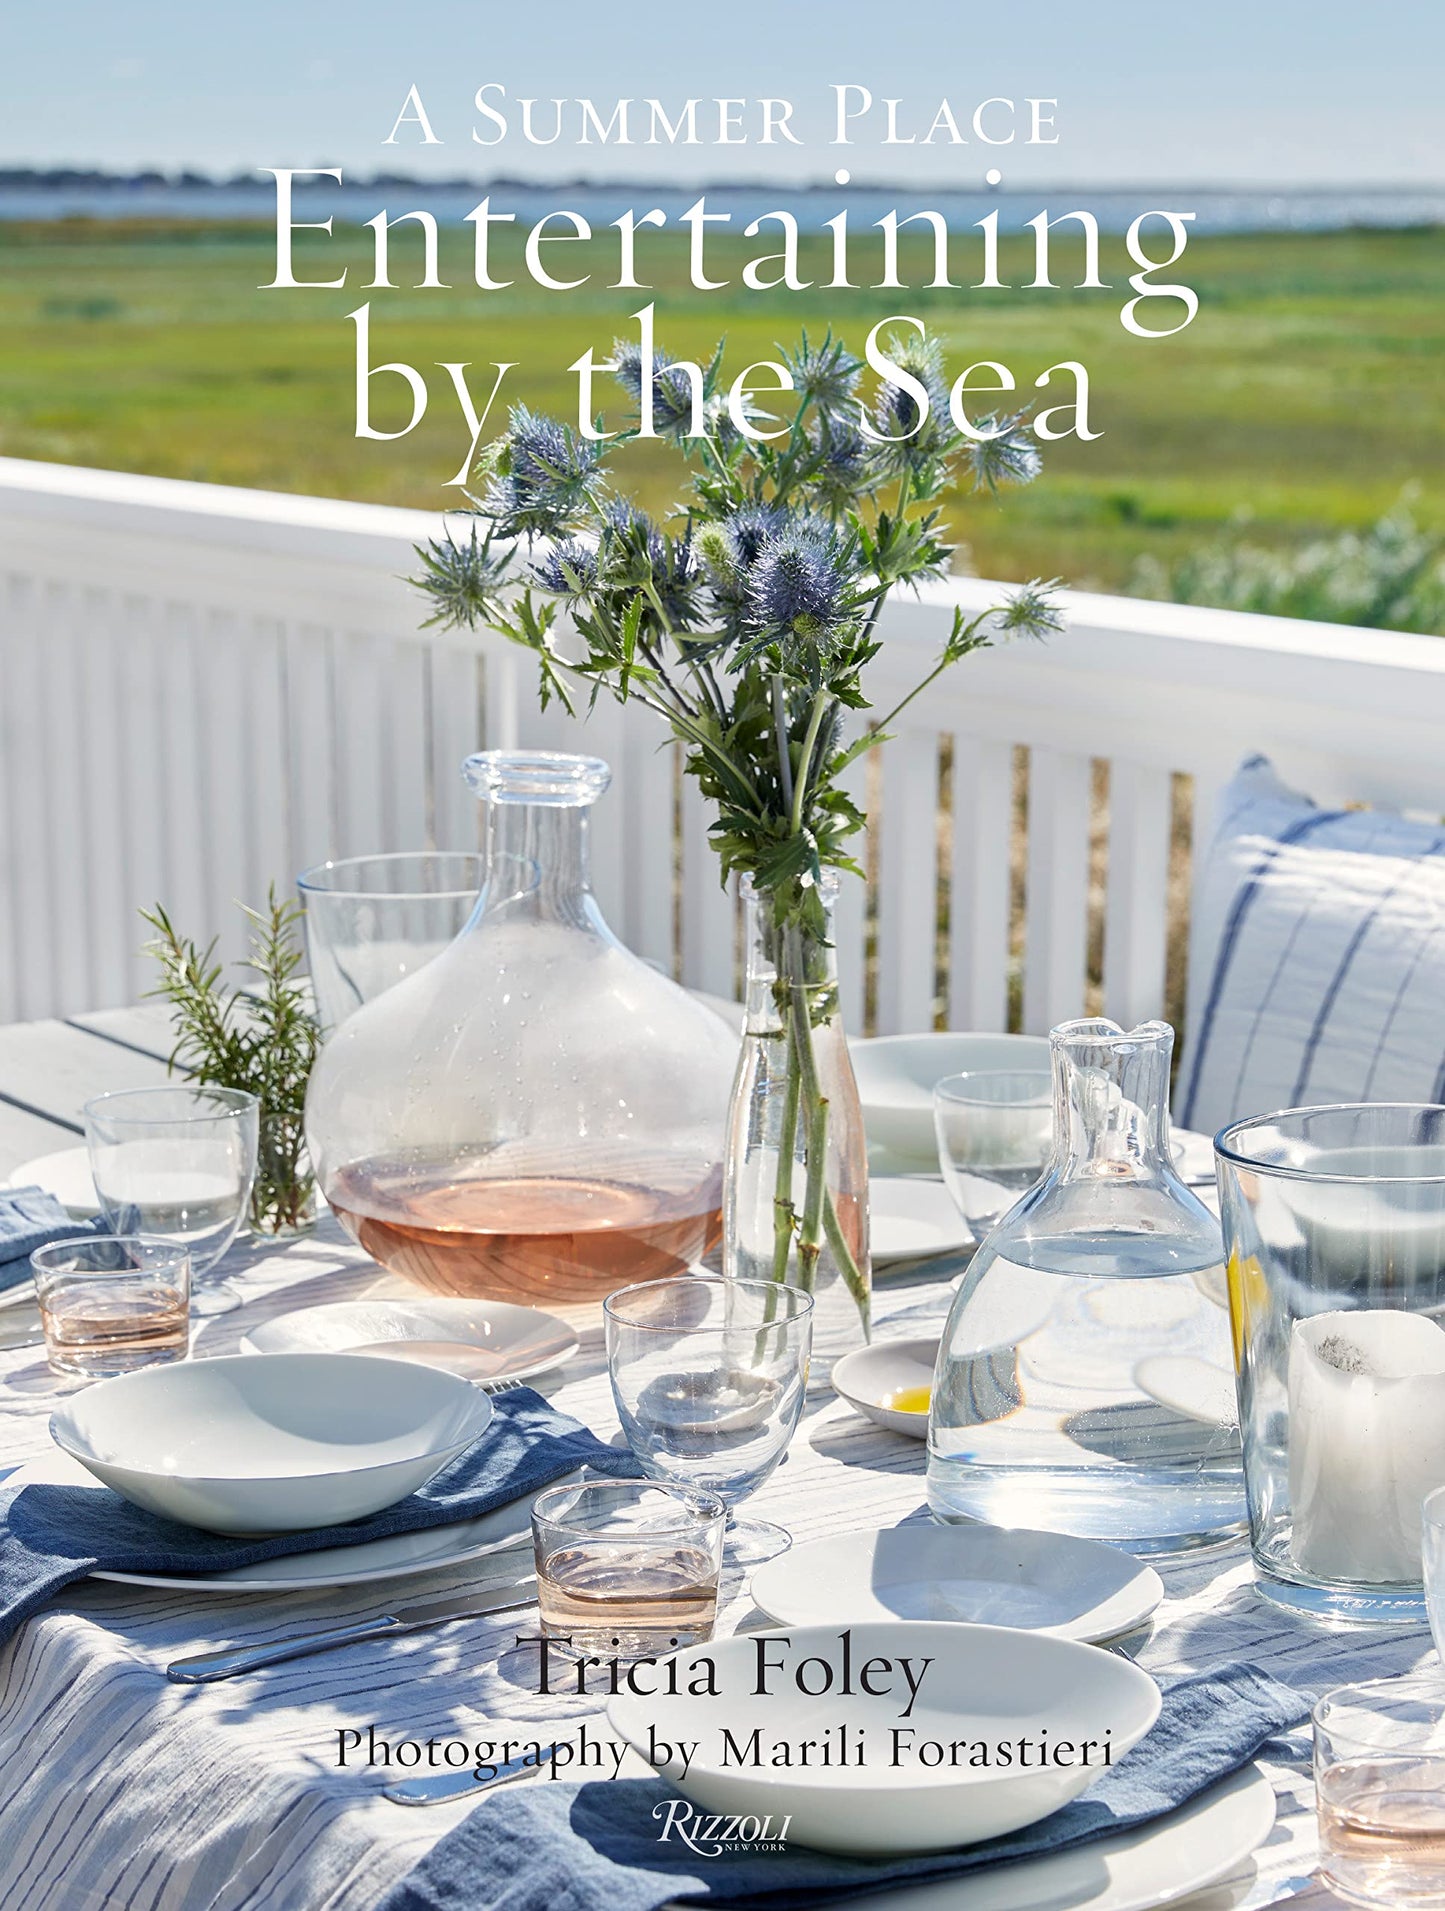 Entertaining by the Sea by Tricia Foley